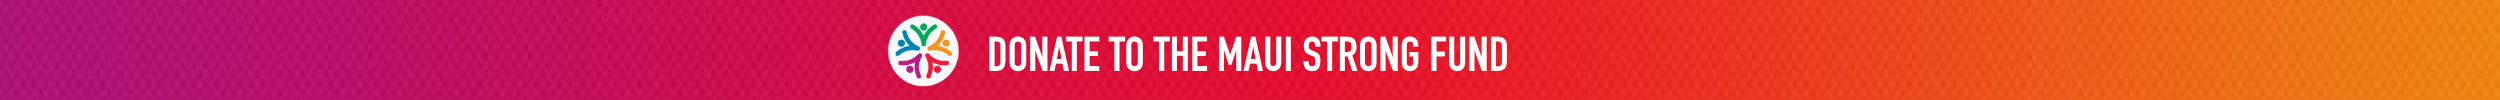 Maui Strong Fund